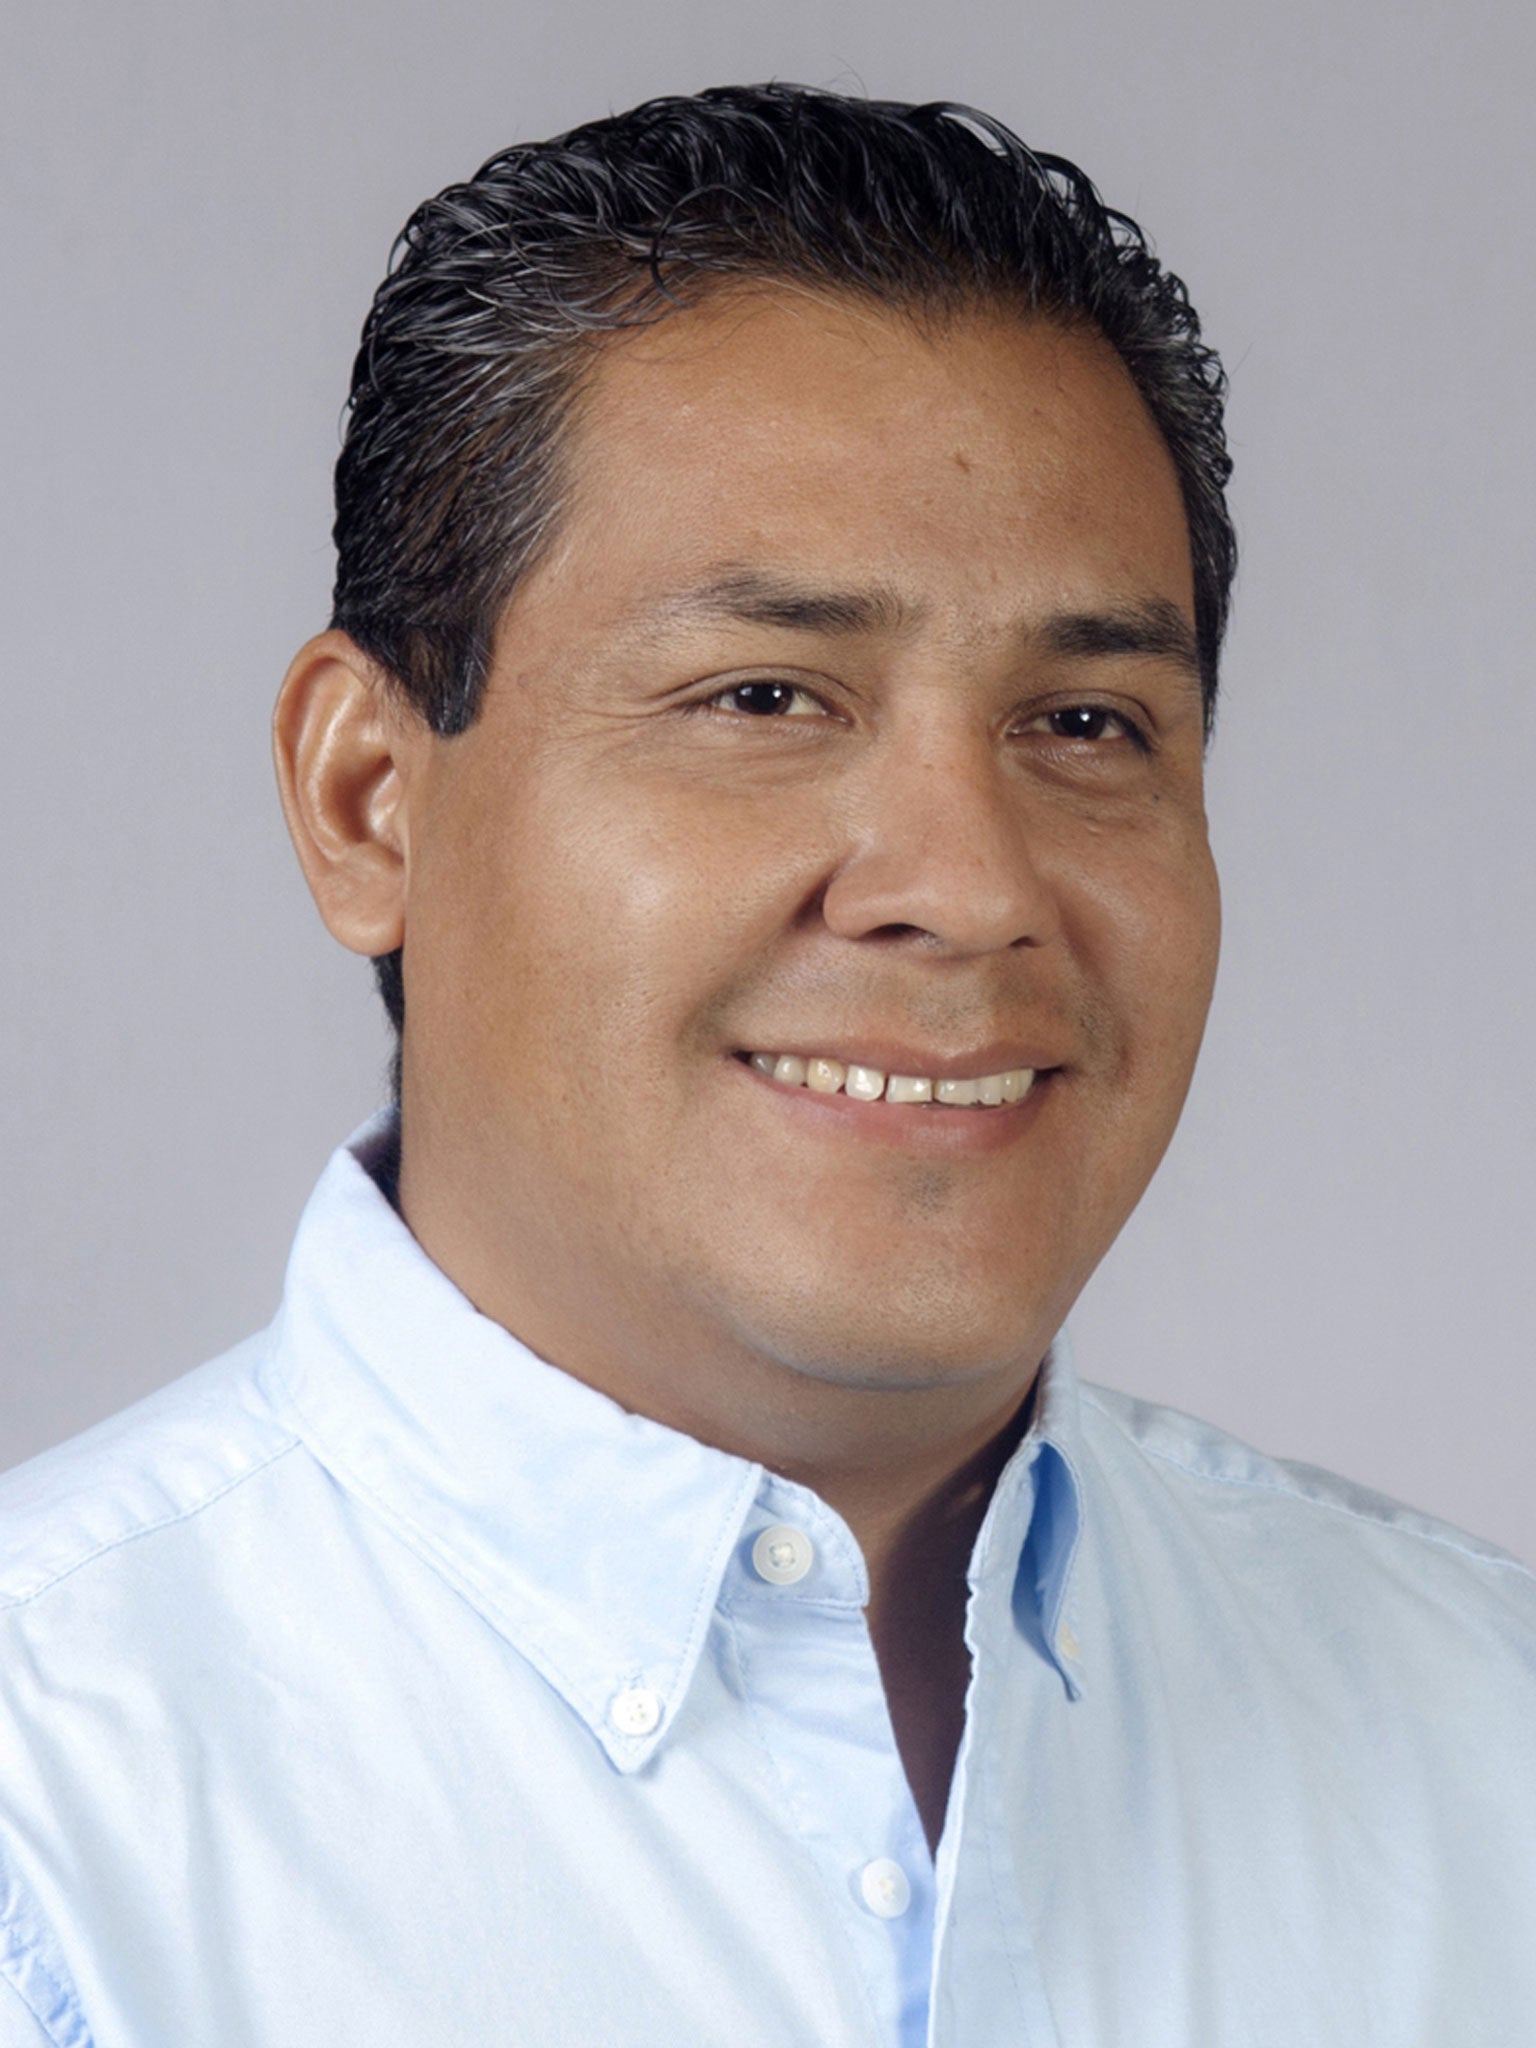 Leninguer Carballido was certified dead by his family in 2010, but recently won an election